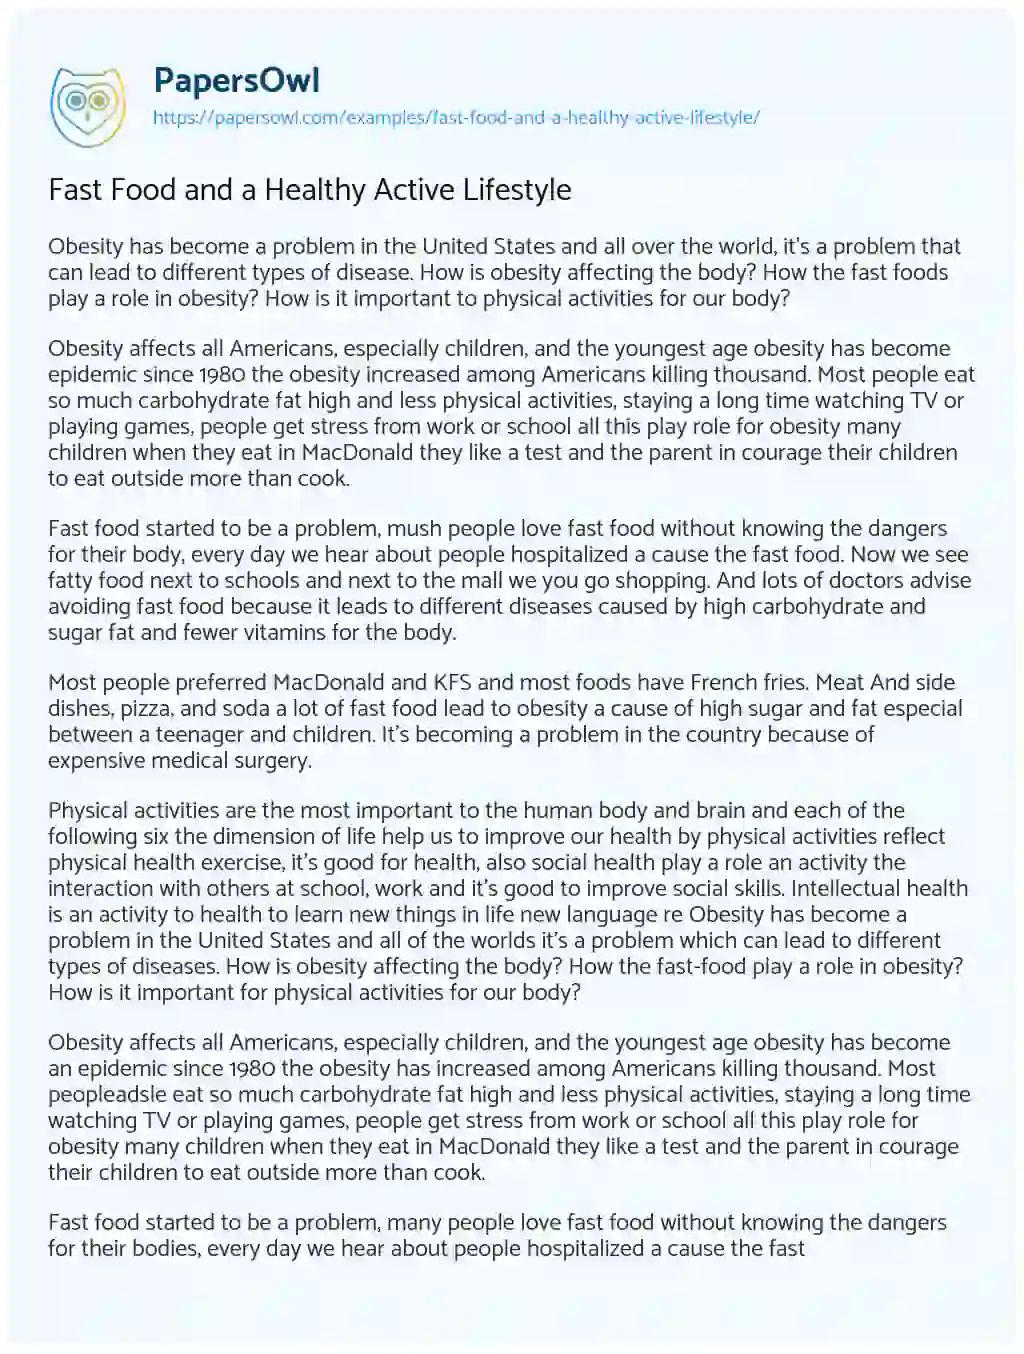 Essay on Fast Food and a Healthy Active Lifestyle